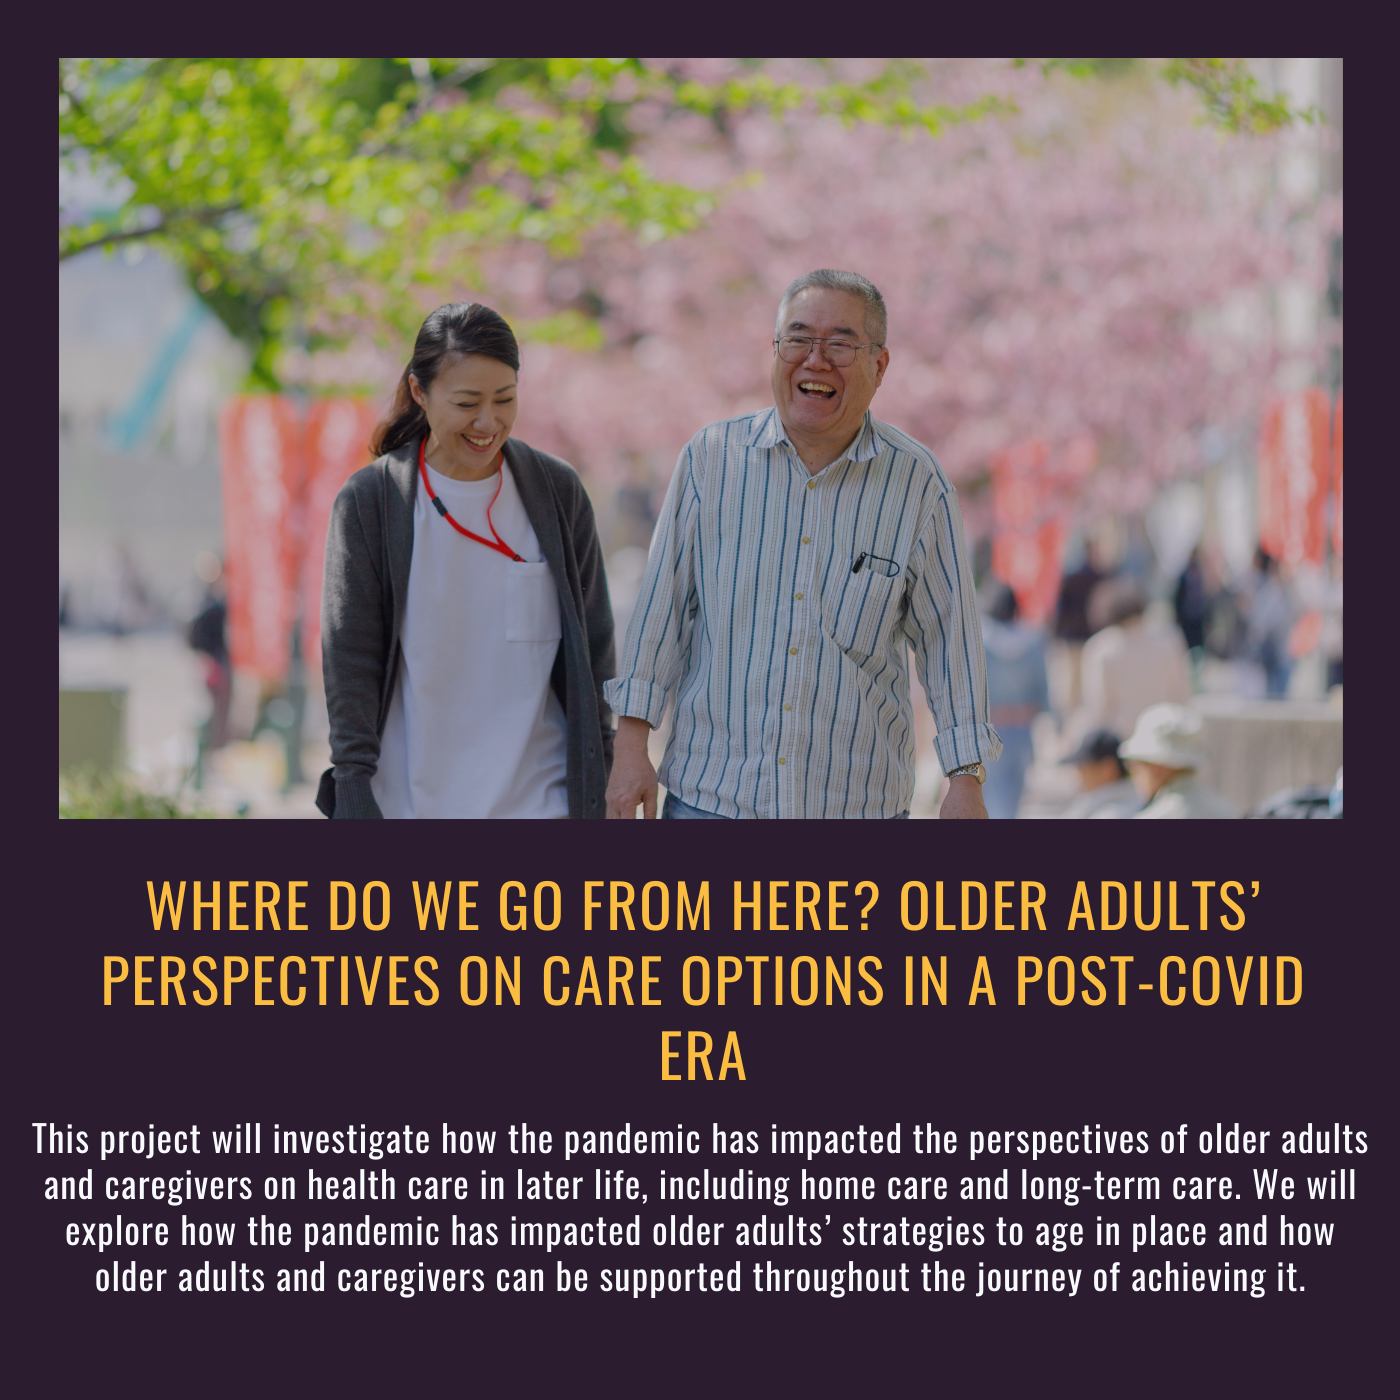 Where do we go from here? Older adults’ perspectives on care options in a post-COVID era. This project will investigate how the pandemic has impacted the perspectives of older adults and caregivers on health care in later life, including home care and long-term care. We will explore how the pandemic has impacted older adults’ strategies to age in place and how older adults and caregivers can be supported throughout the journey of achieving it. Picture of an older man and younger woman walking outside